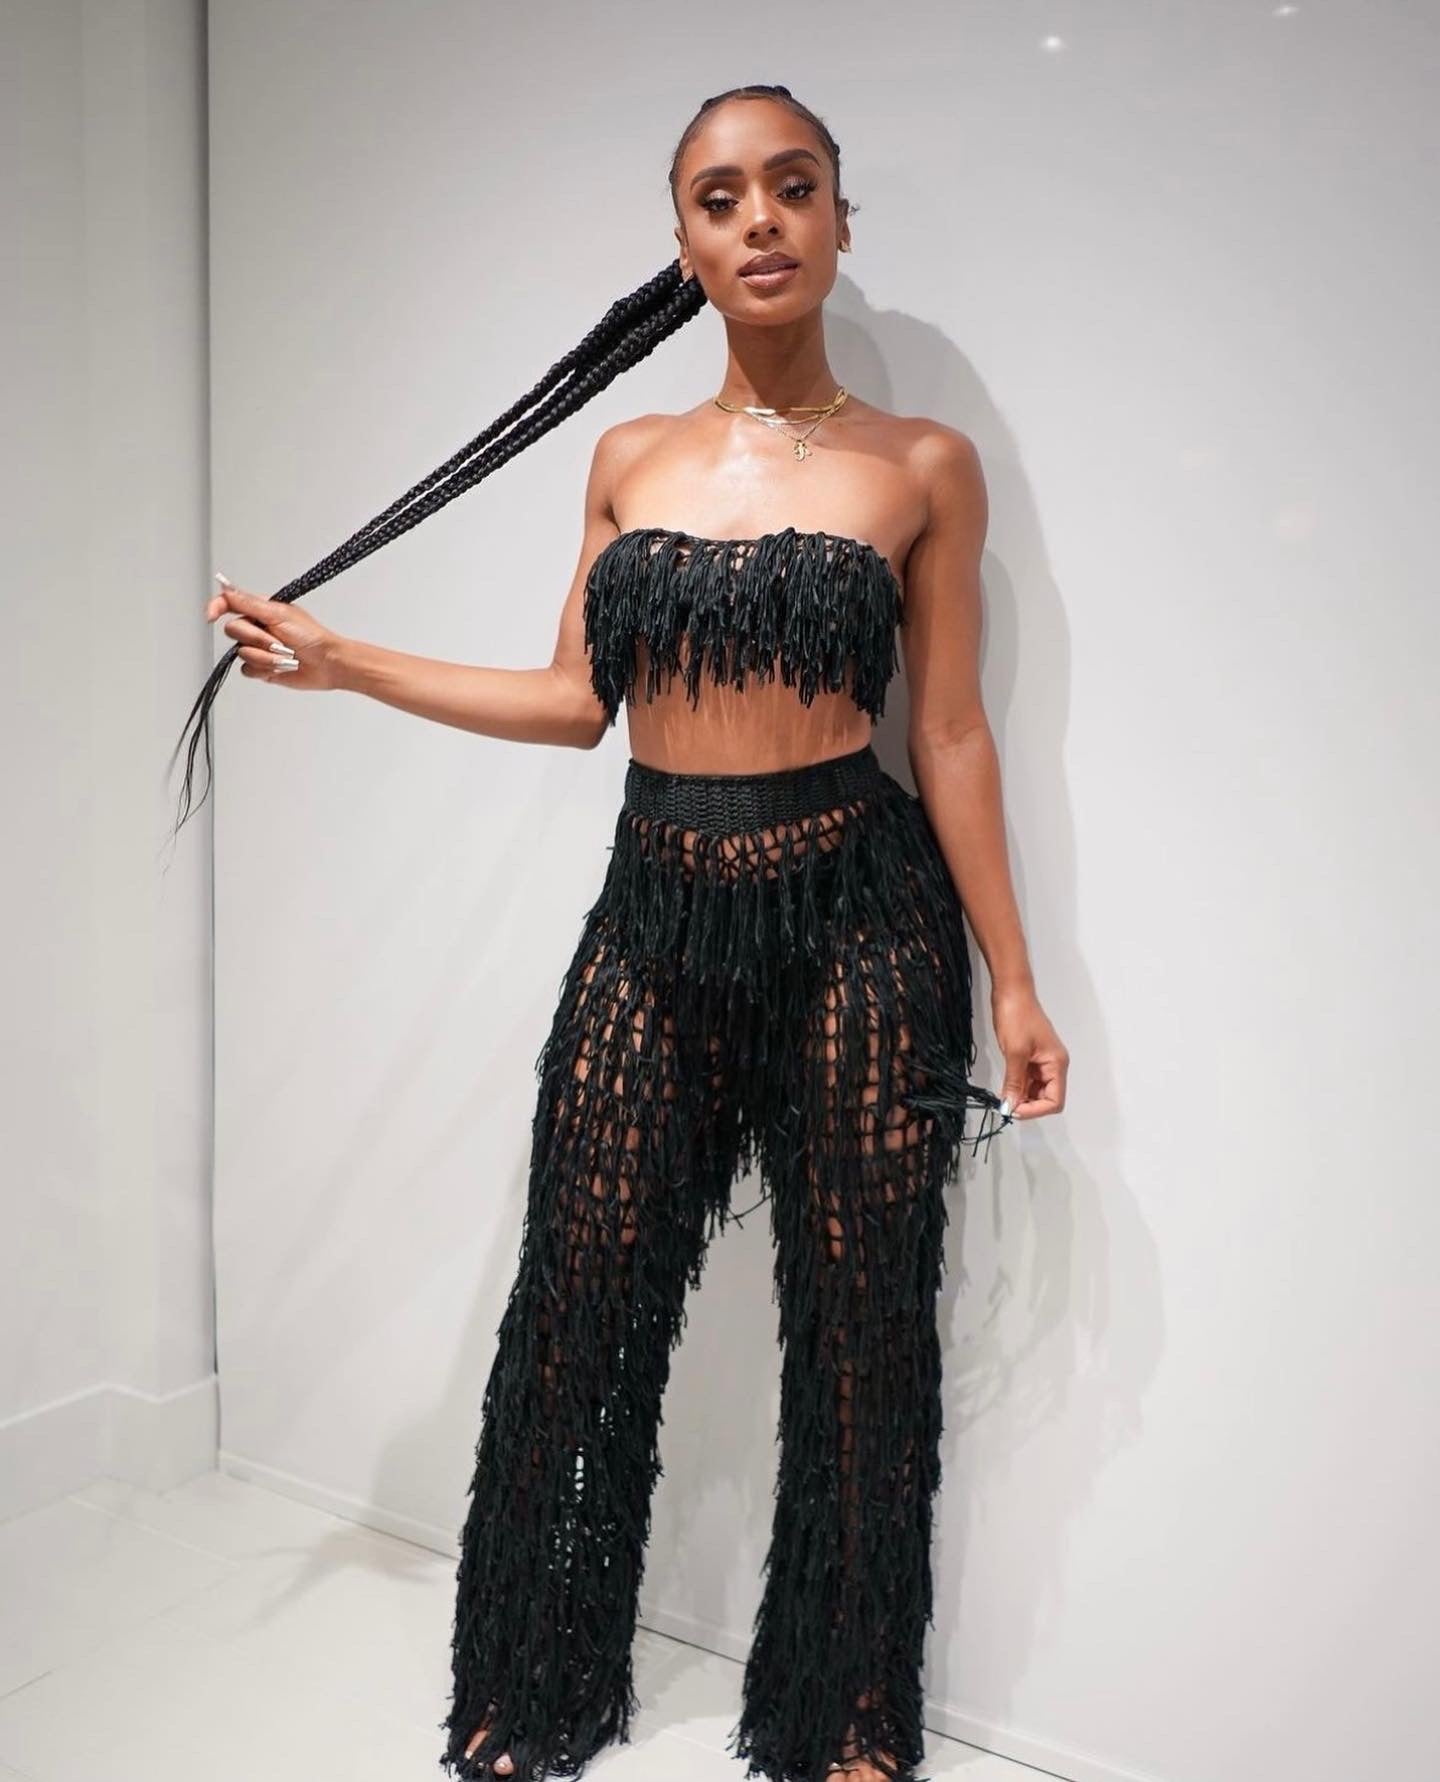 Black Crochet Halter Fringe Pants Two Piece Set Cover Up – Hot Miami Styles